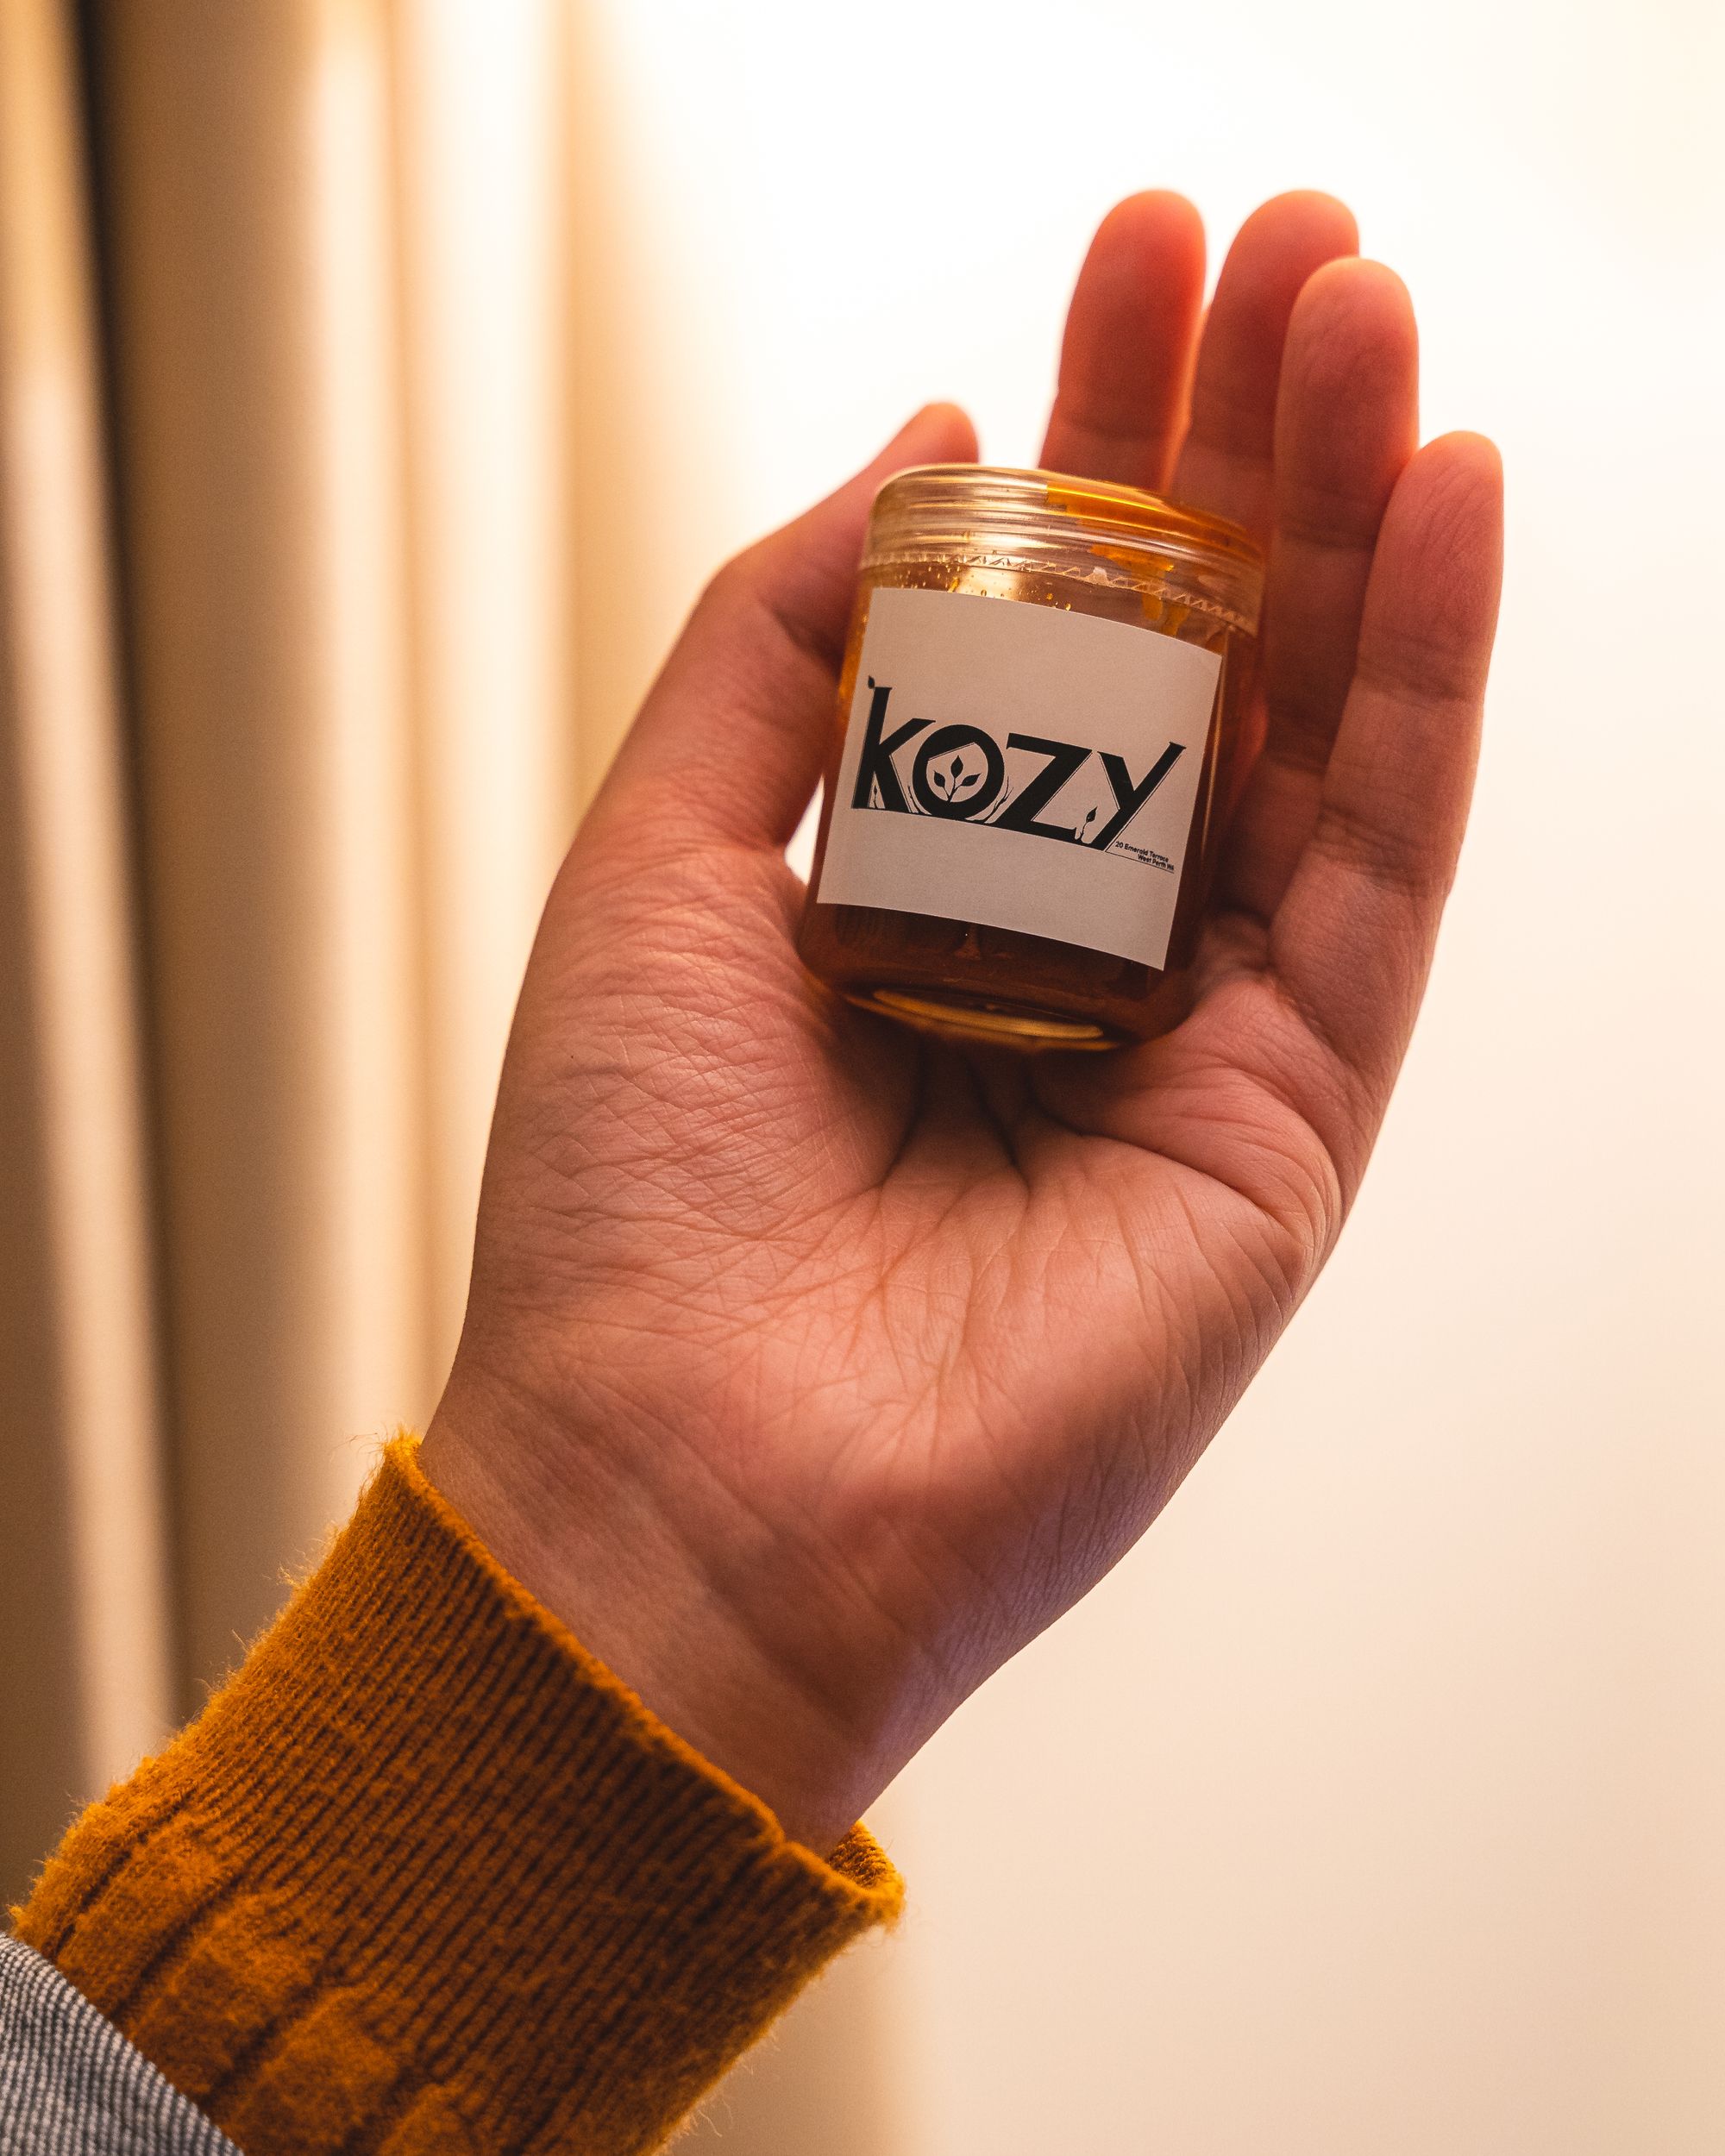 Hand holding a container of sauce with "Kozy" written on it